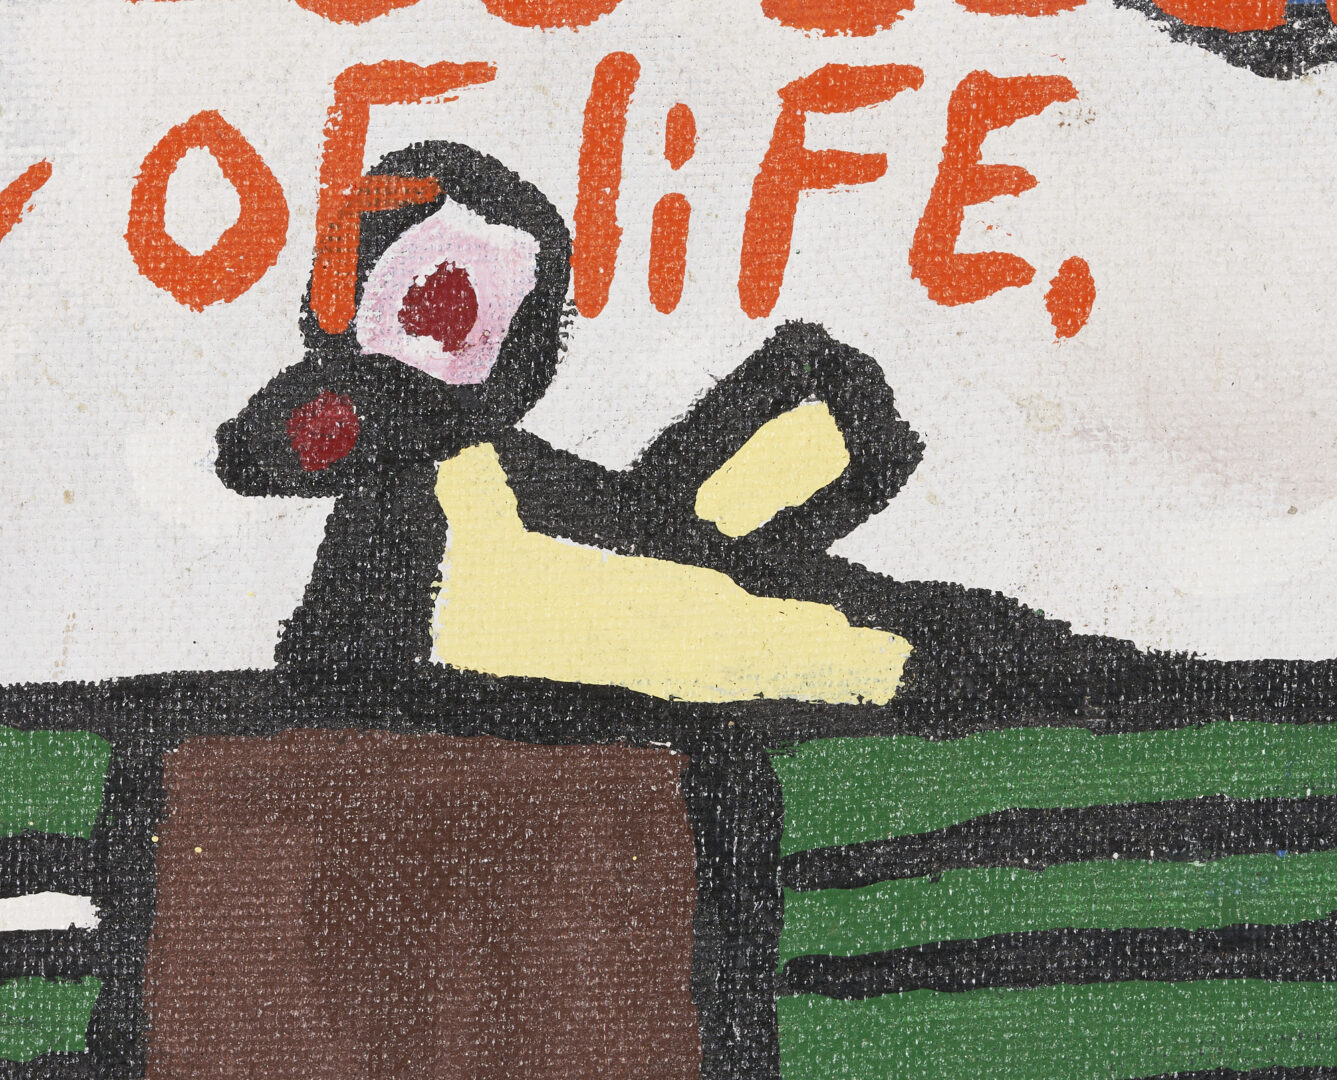 Lot 767: Joe Light Outsider Art Painting, When You Live in the Ghetto